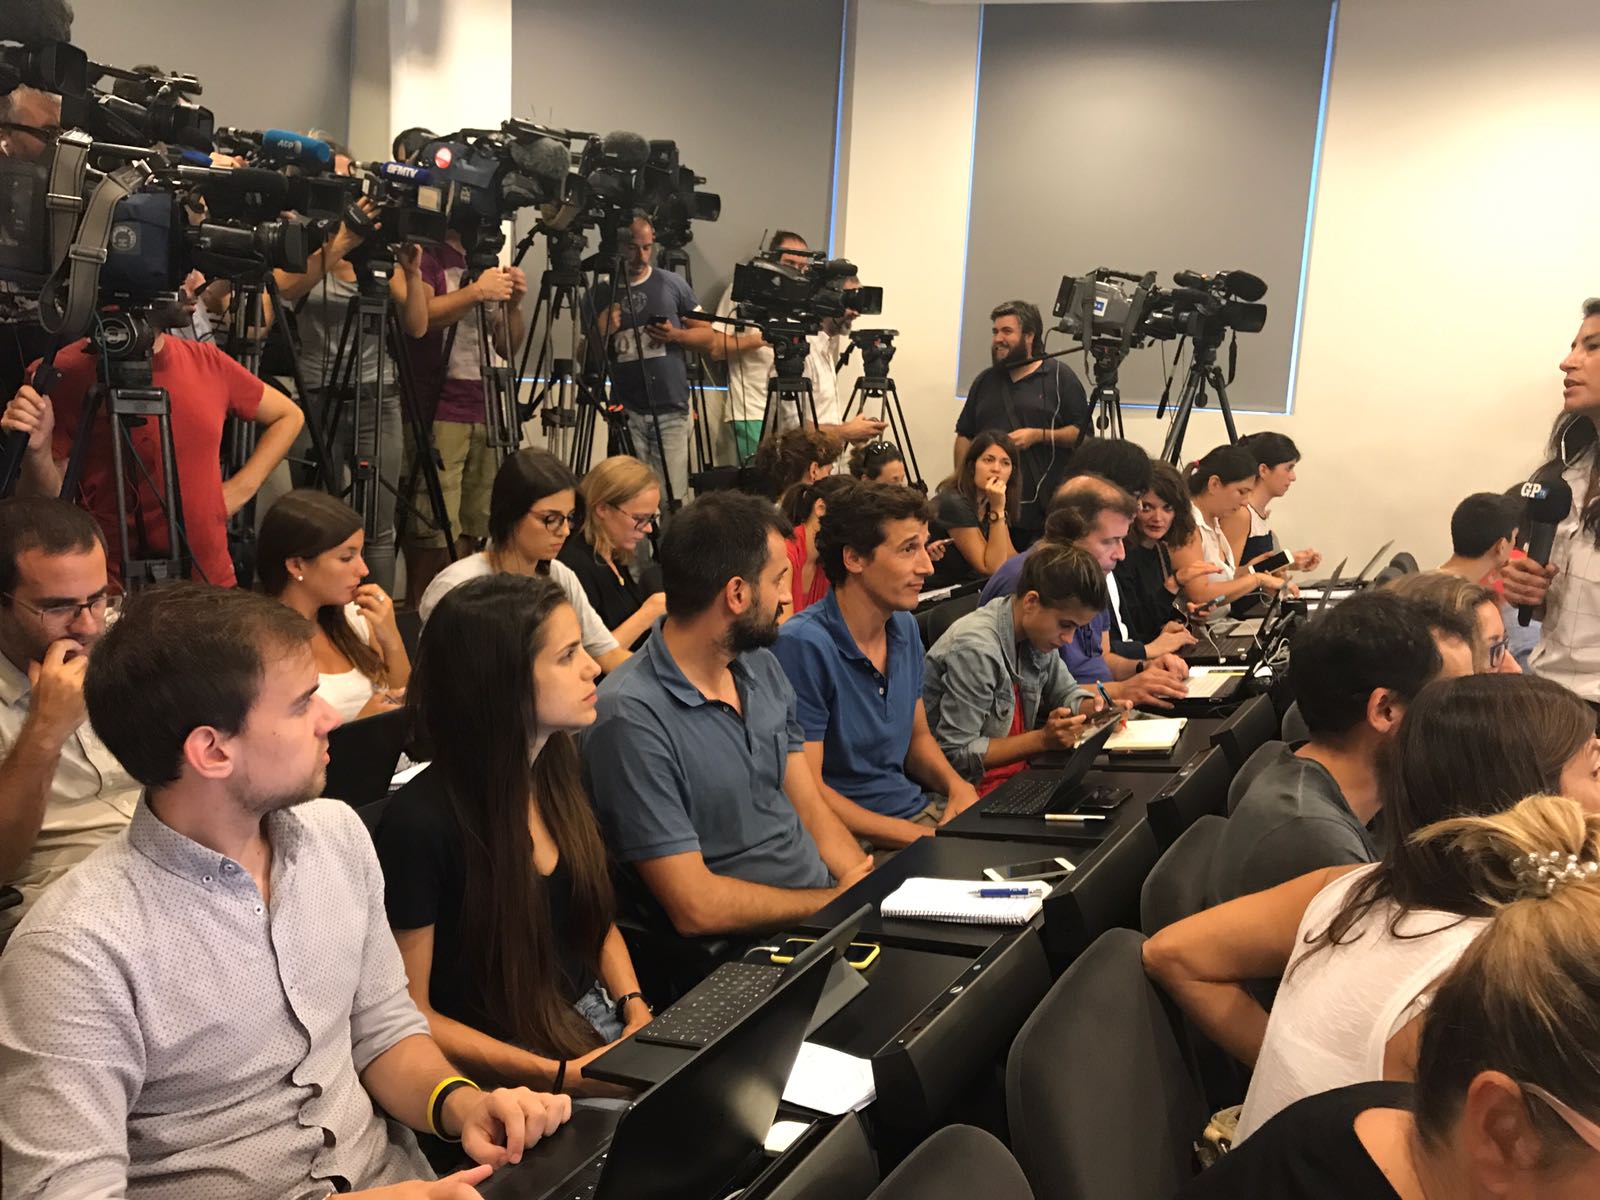 Indignation over complaints from journalists at a press conference in Catalan